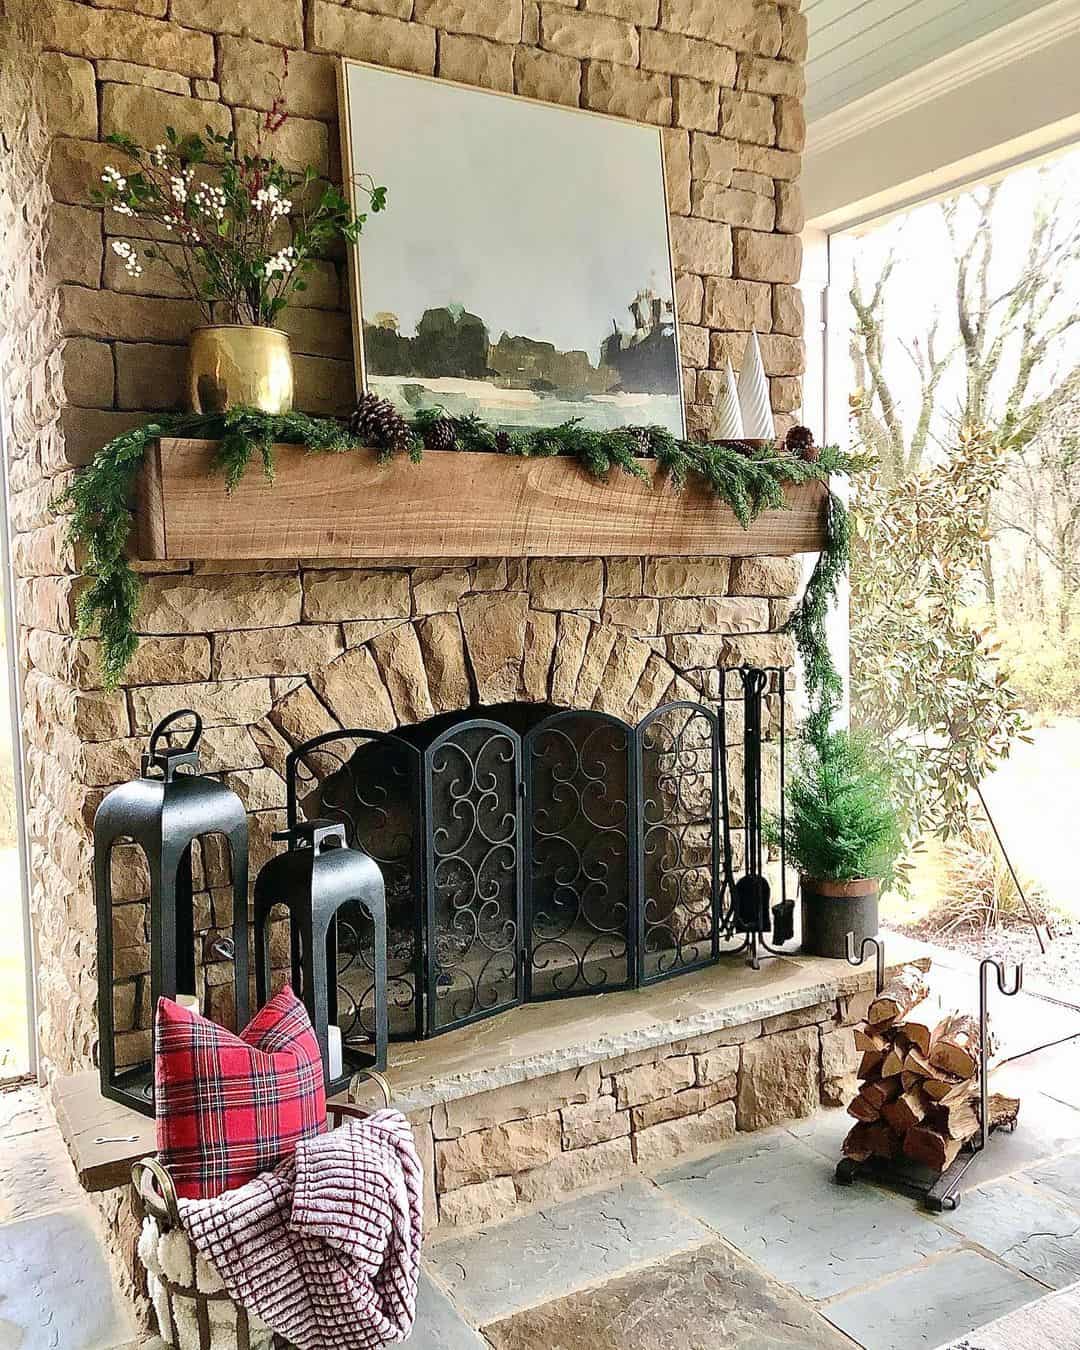 32 Fireplace Gate Options That Offer Safety and Style